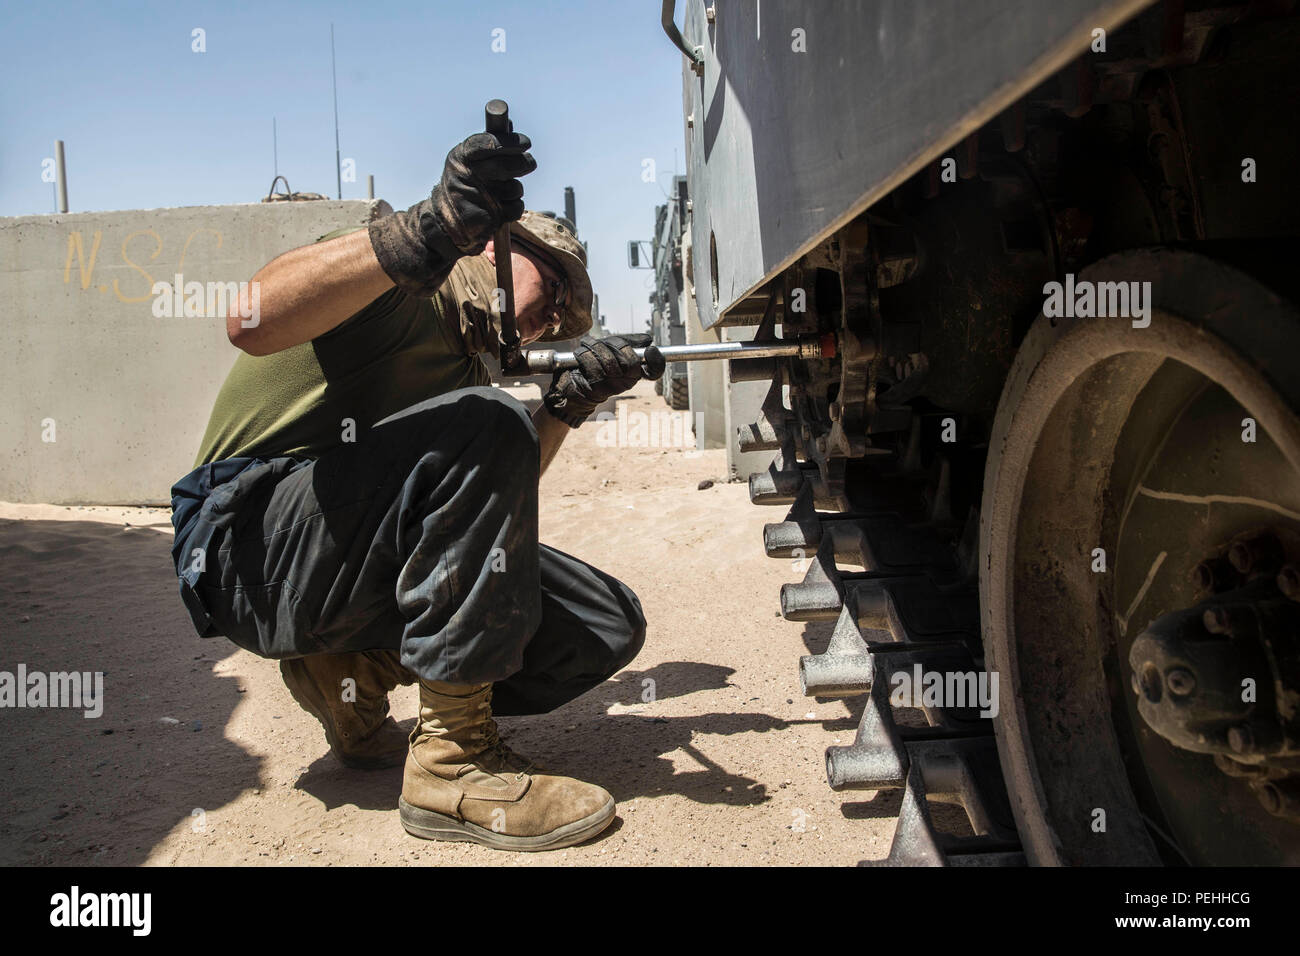 KUWAIT (Aug. 22, 2015) U.S. Marine Lance Cpl. John Figueroa checks the suspension on an Amphibious Assault Vehicle (AAV-7). Figueroa is a crewman with Kilo Company, Battalion Landing Team 3rd Battalion, 1st Marine Regiment, 15th Marine Expeditionary Unit (MEU). These Marines maintain the AAVs to ensure they remain in good condition and are operable in extreme environments. Elements of the 15th MEU are ashore in Kuwait for sustainment training to maintain and enhance the skills they developed during their pre-deployment training period.  The 15th MEU is embarked on the Essex Amphibious Ready Gr Stock Photo